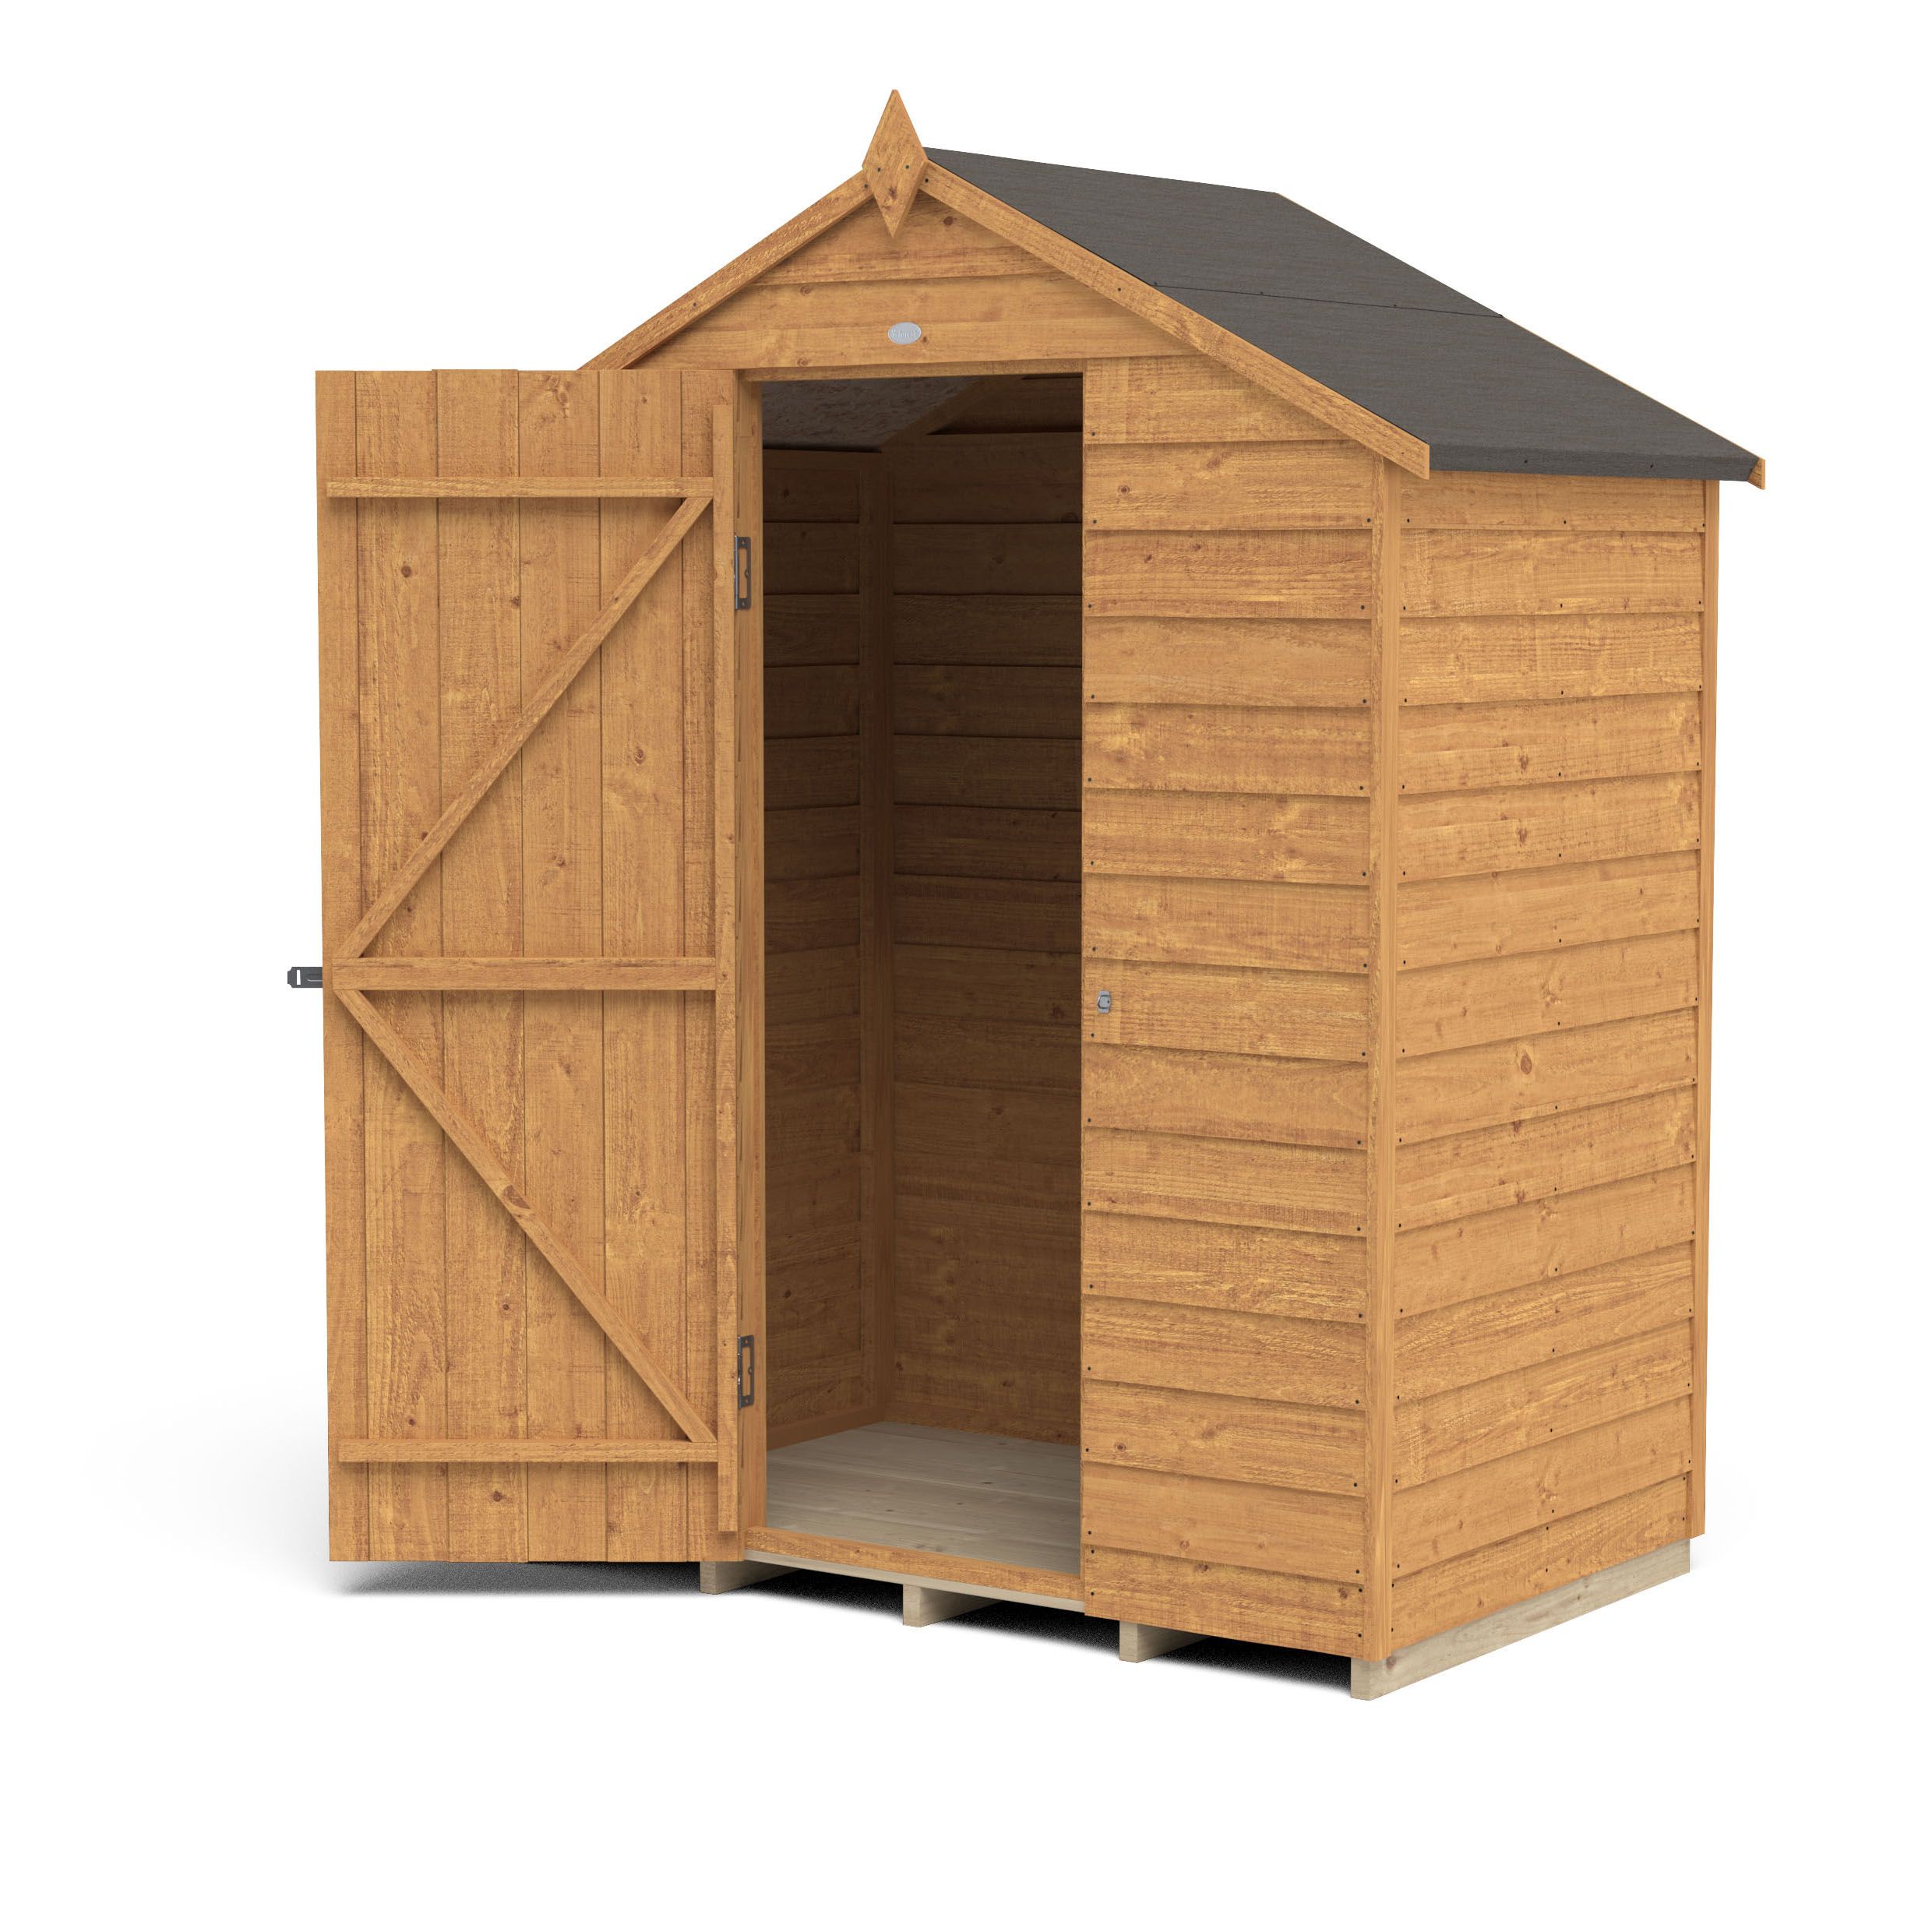 Forest Garden Overlap 5x3 ft Apex Wooden Dip treated Shed with floor - Assembly service included